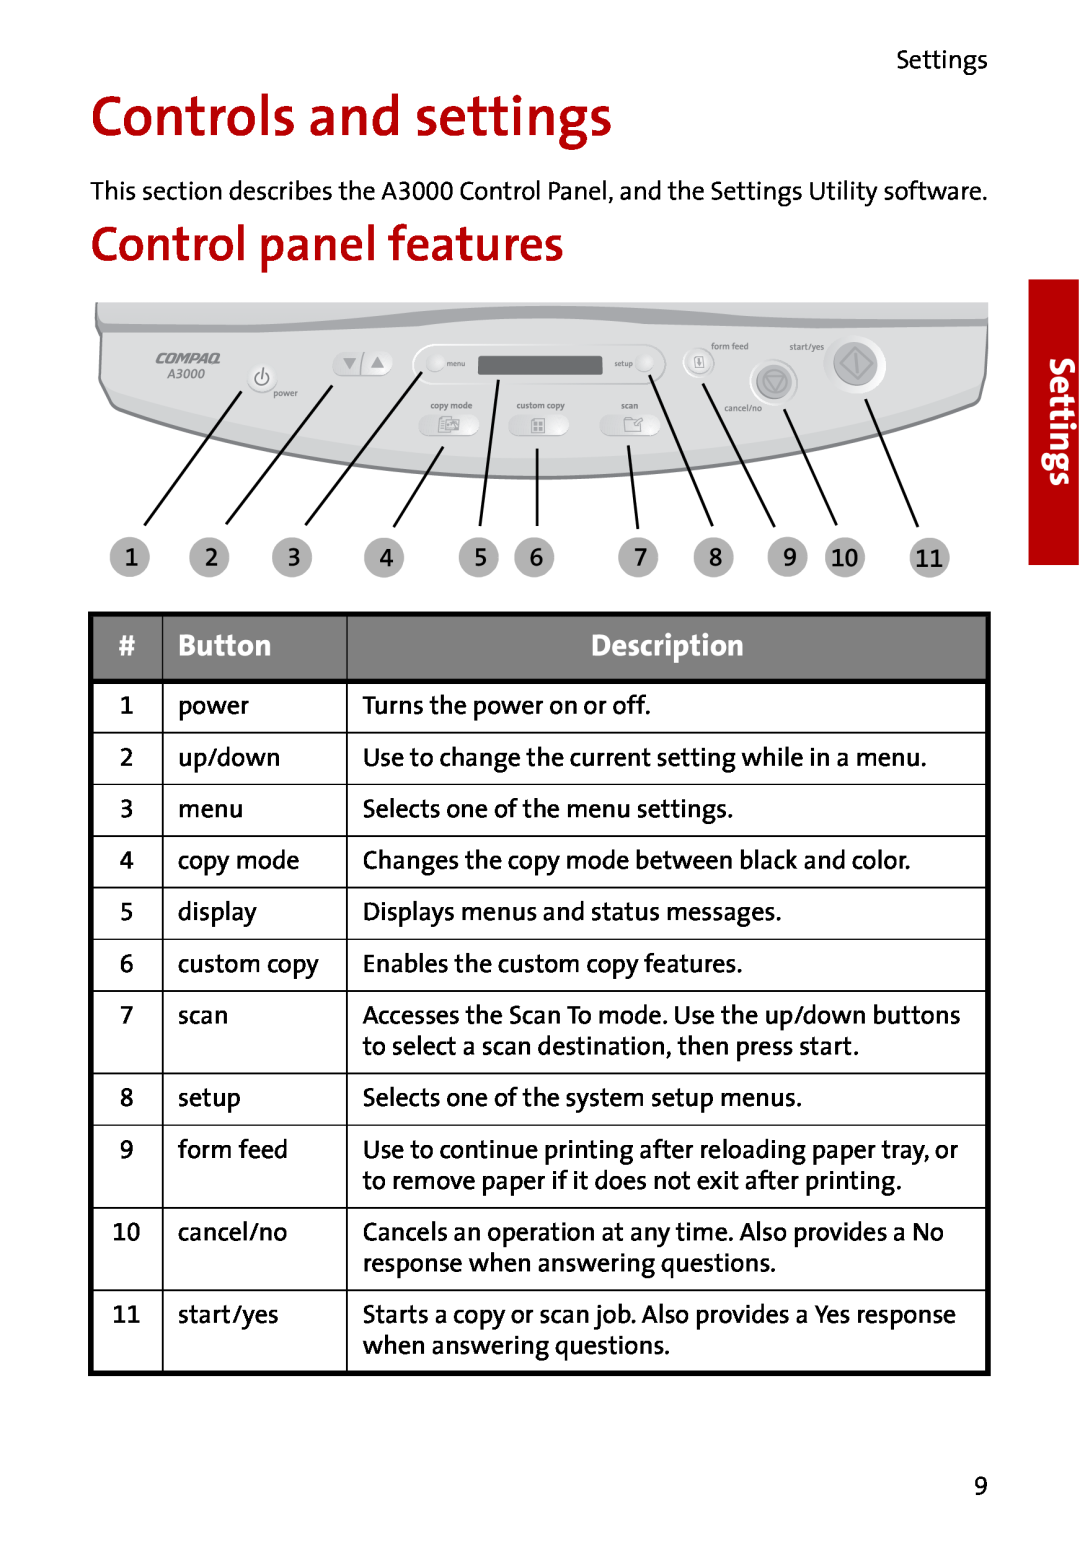 Compaq A3000 manual Controls and settings, Control panel features, Settings, Button, Description 